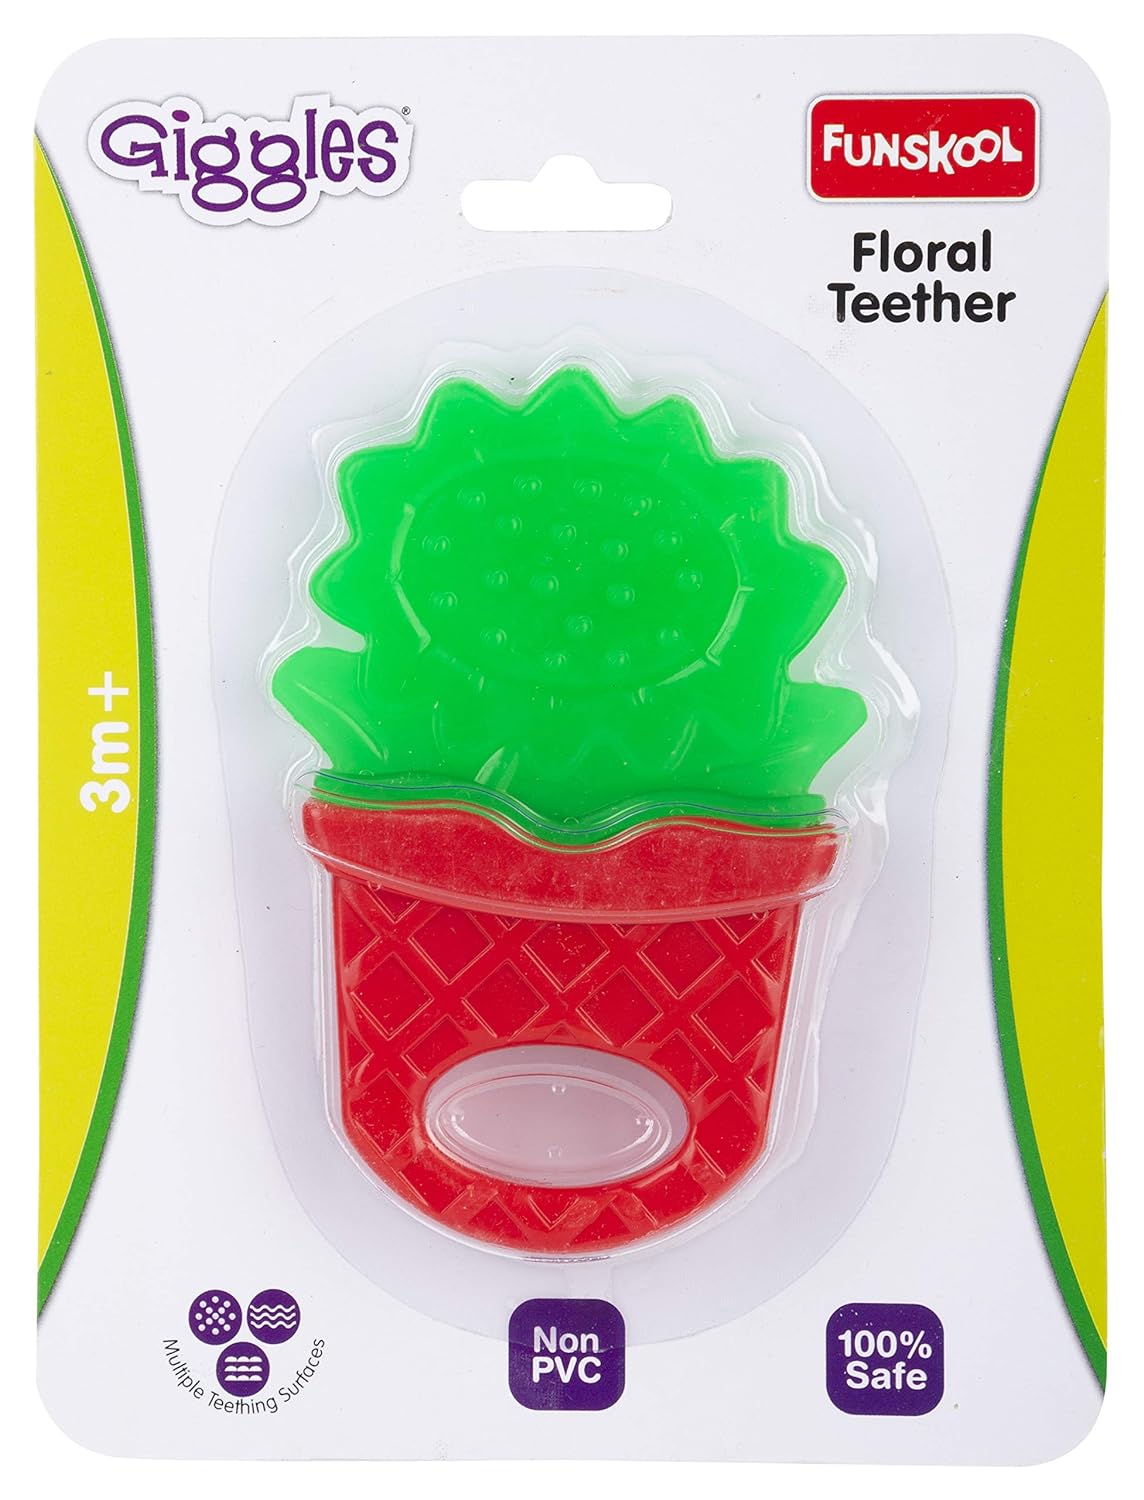 Giggles Floral Teether: Soothing Gum Relief, Easy-to-Hold & Chew, Ideal for 3+ Month Old Infants